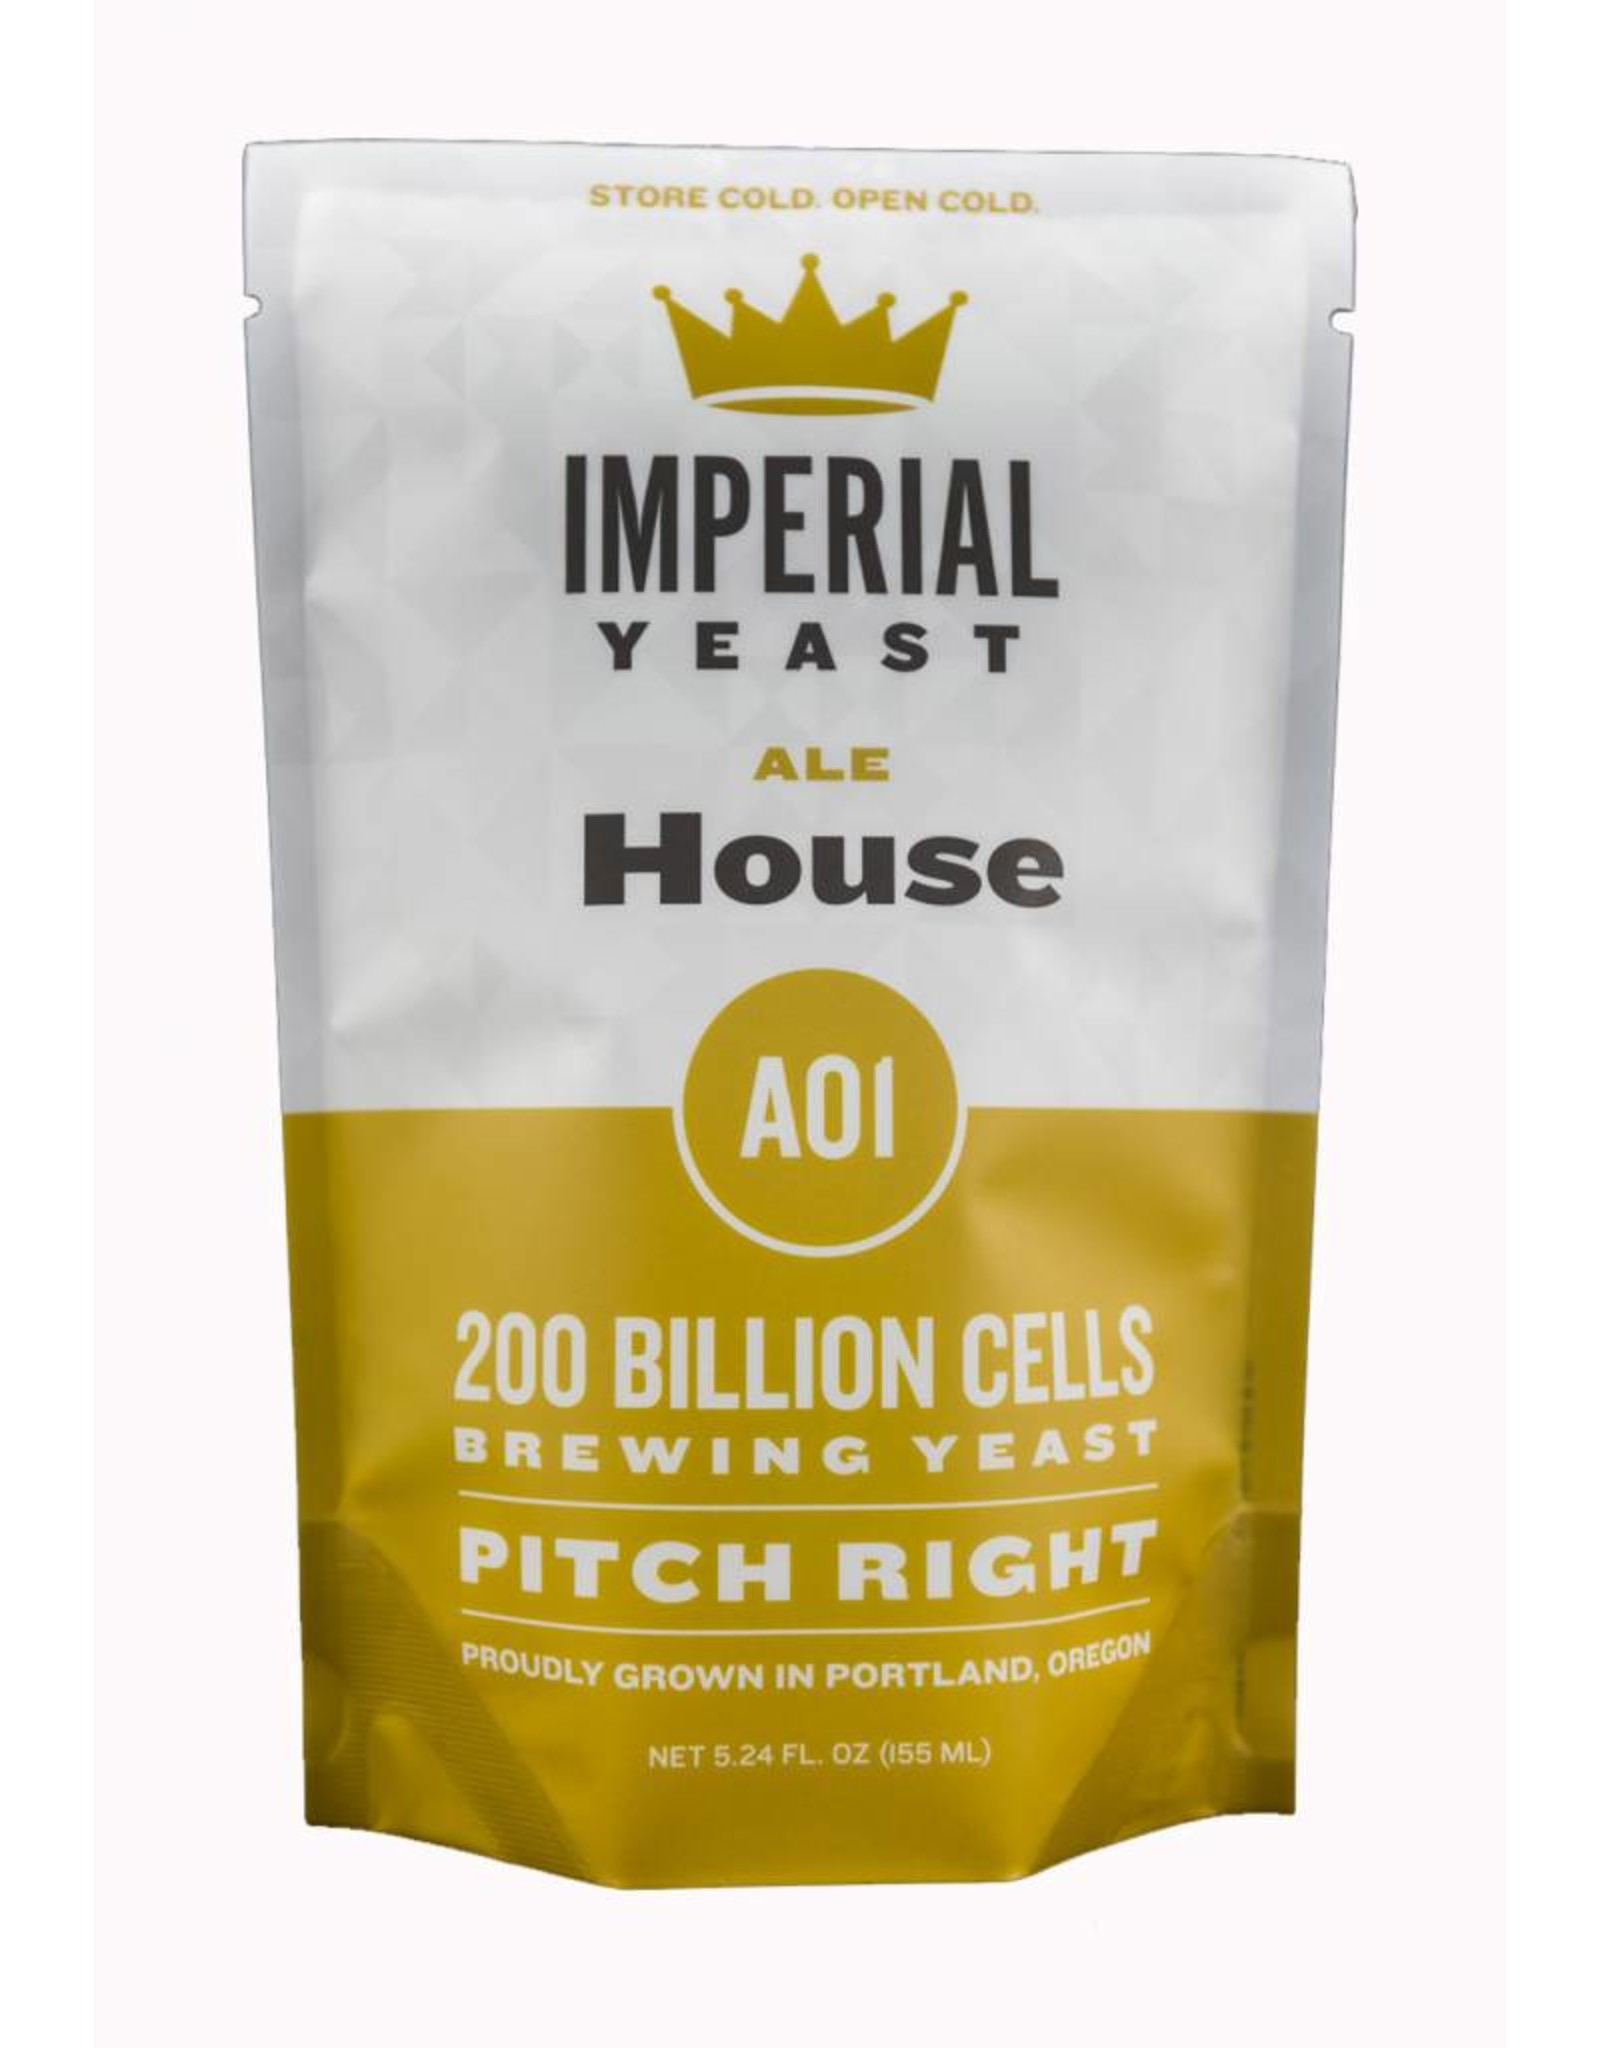 Imperial Yeast Imperial Yeast A01 - House